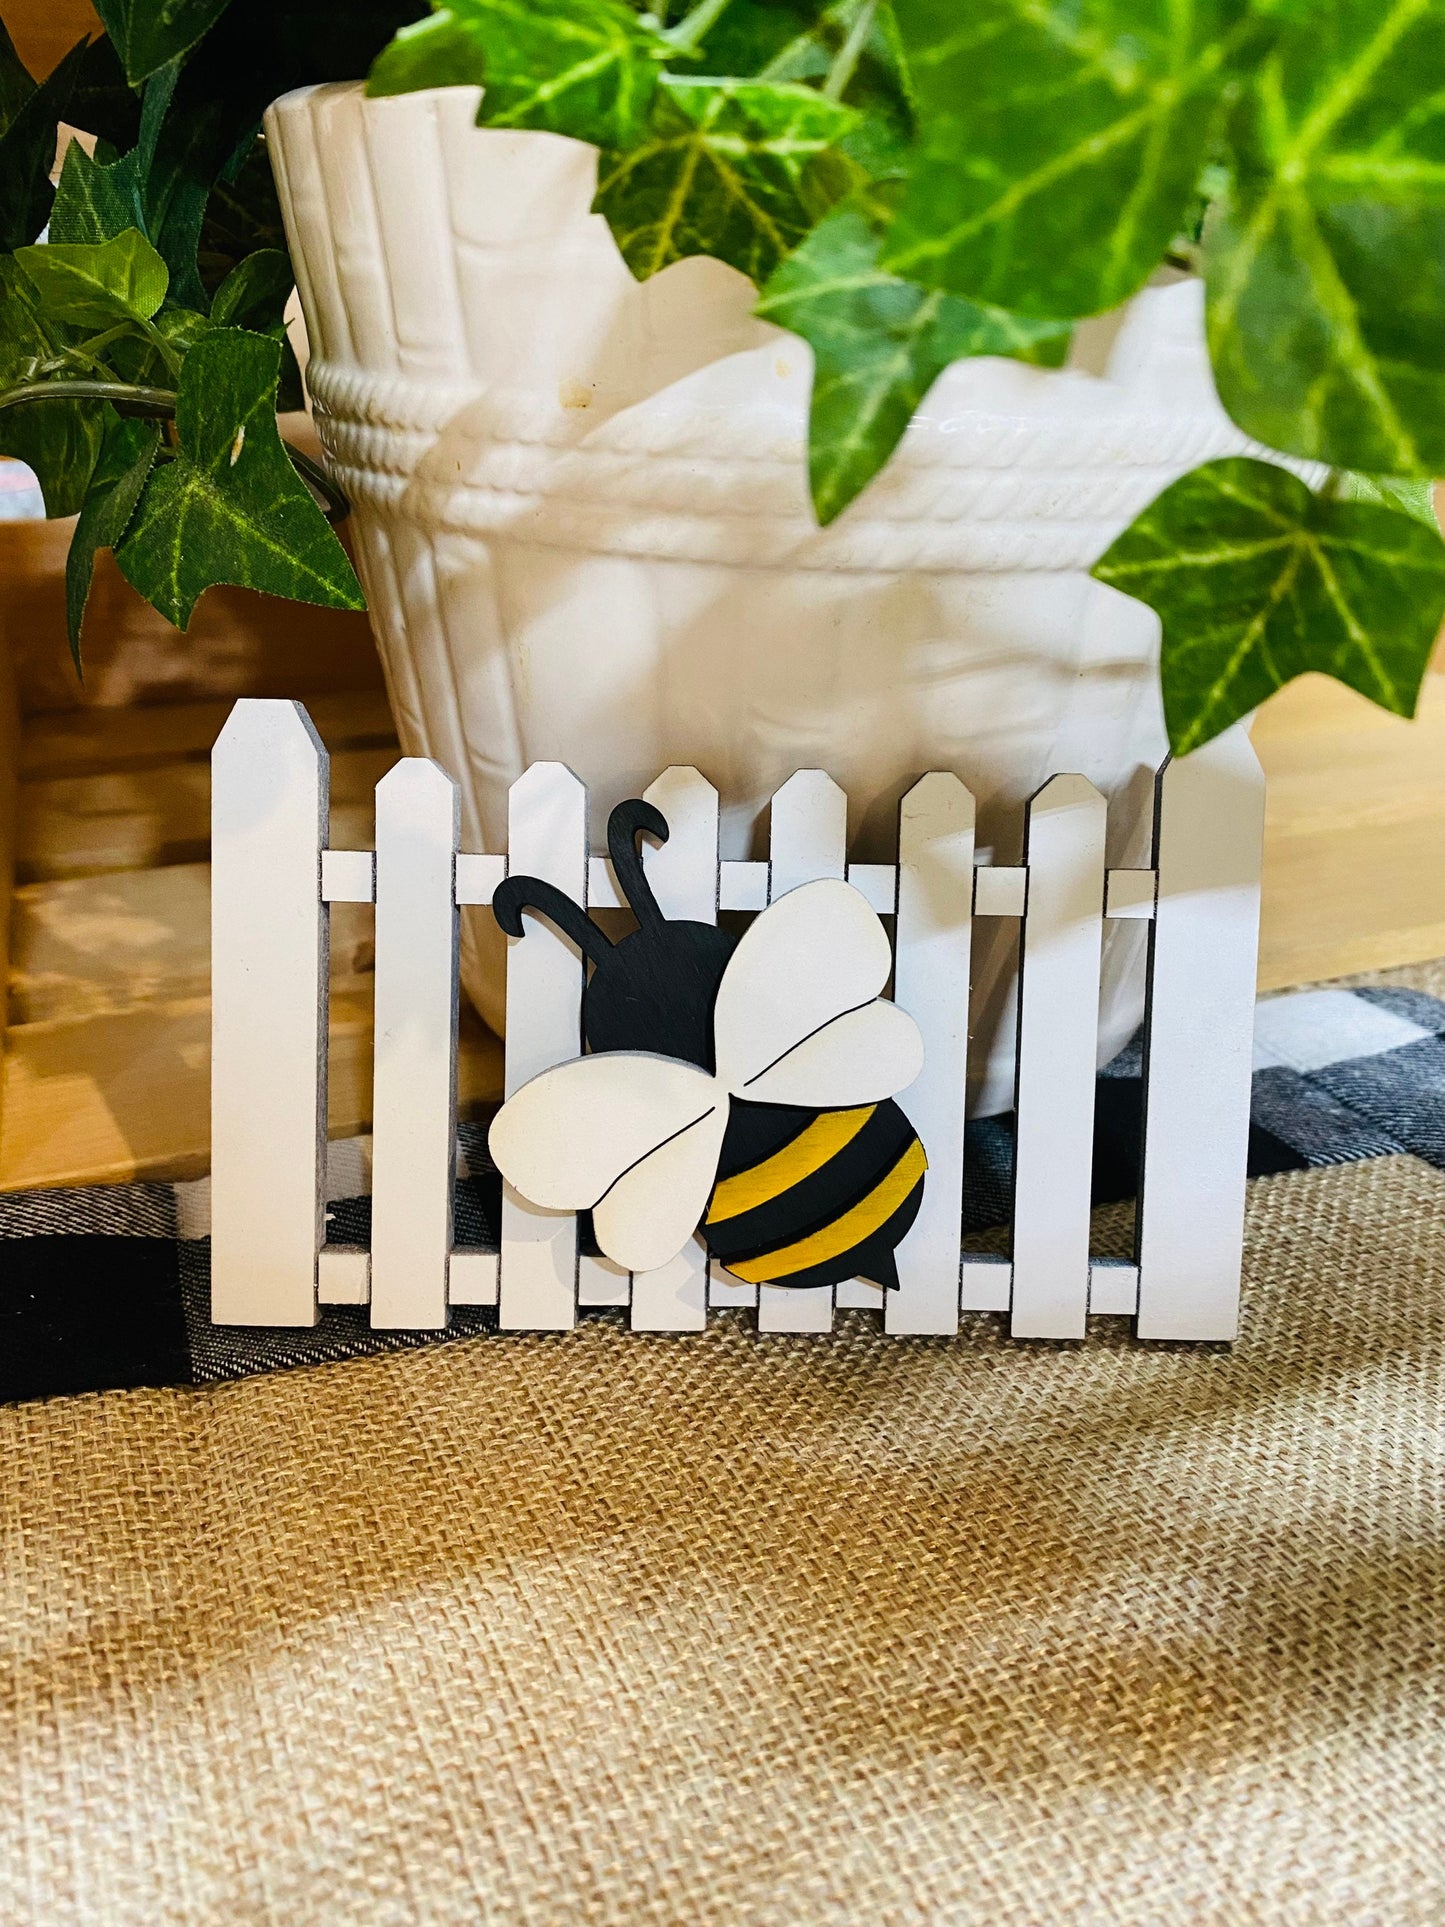 Bee Tiered Tray Fence Sign, Small Bee Tray Fence, Spring Fence Tray Decor, Tiered Tray Fence with Bee